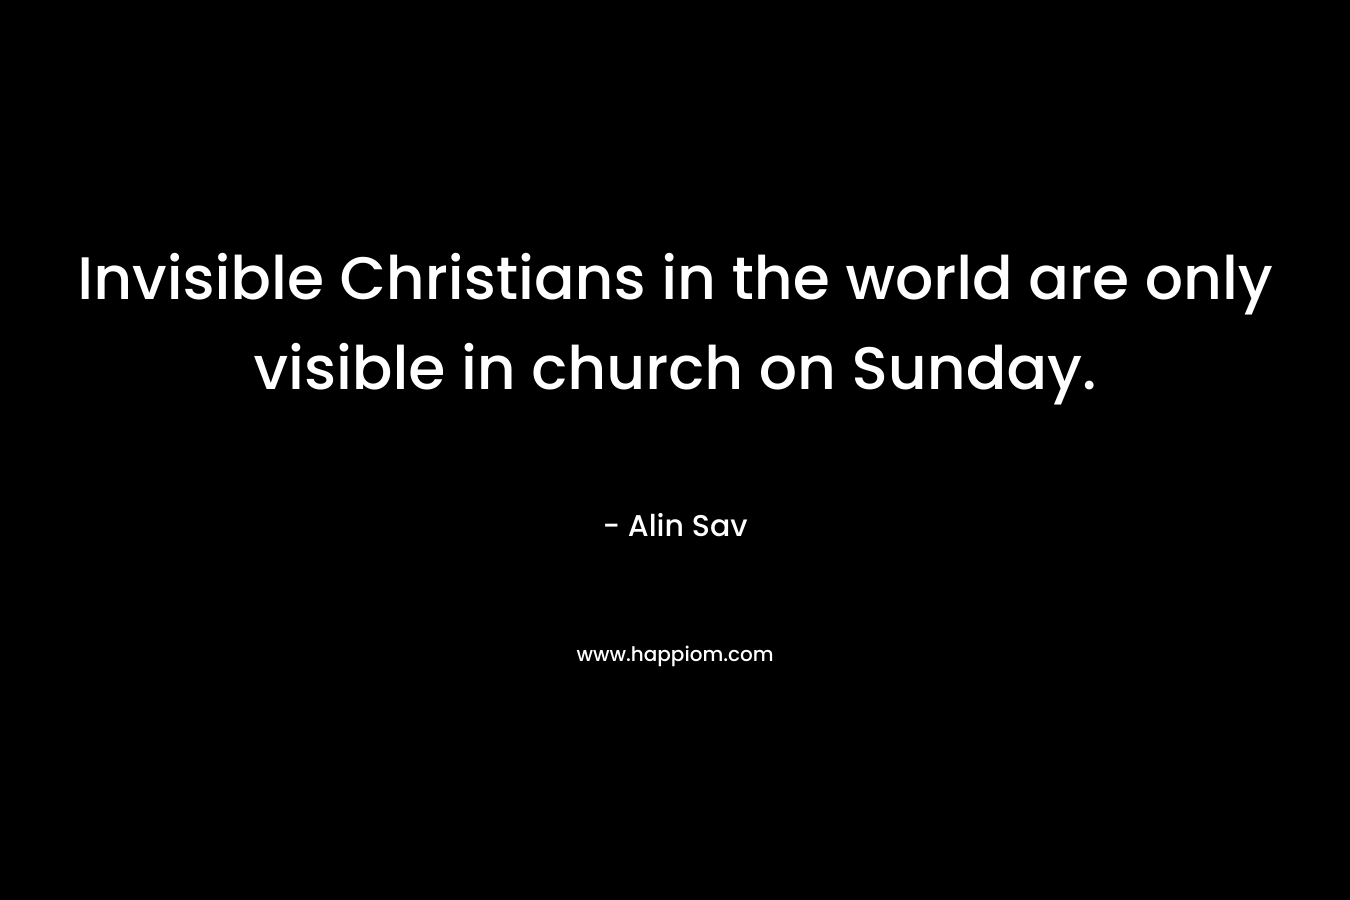 Invisible Christians in the world are only visible in church on Sunday. – Alin Sav